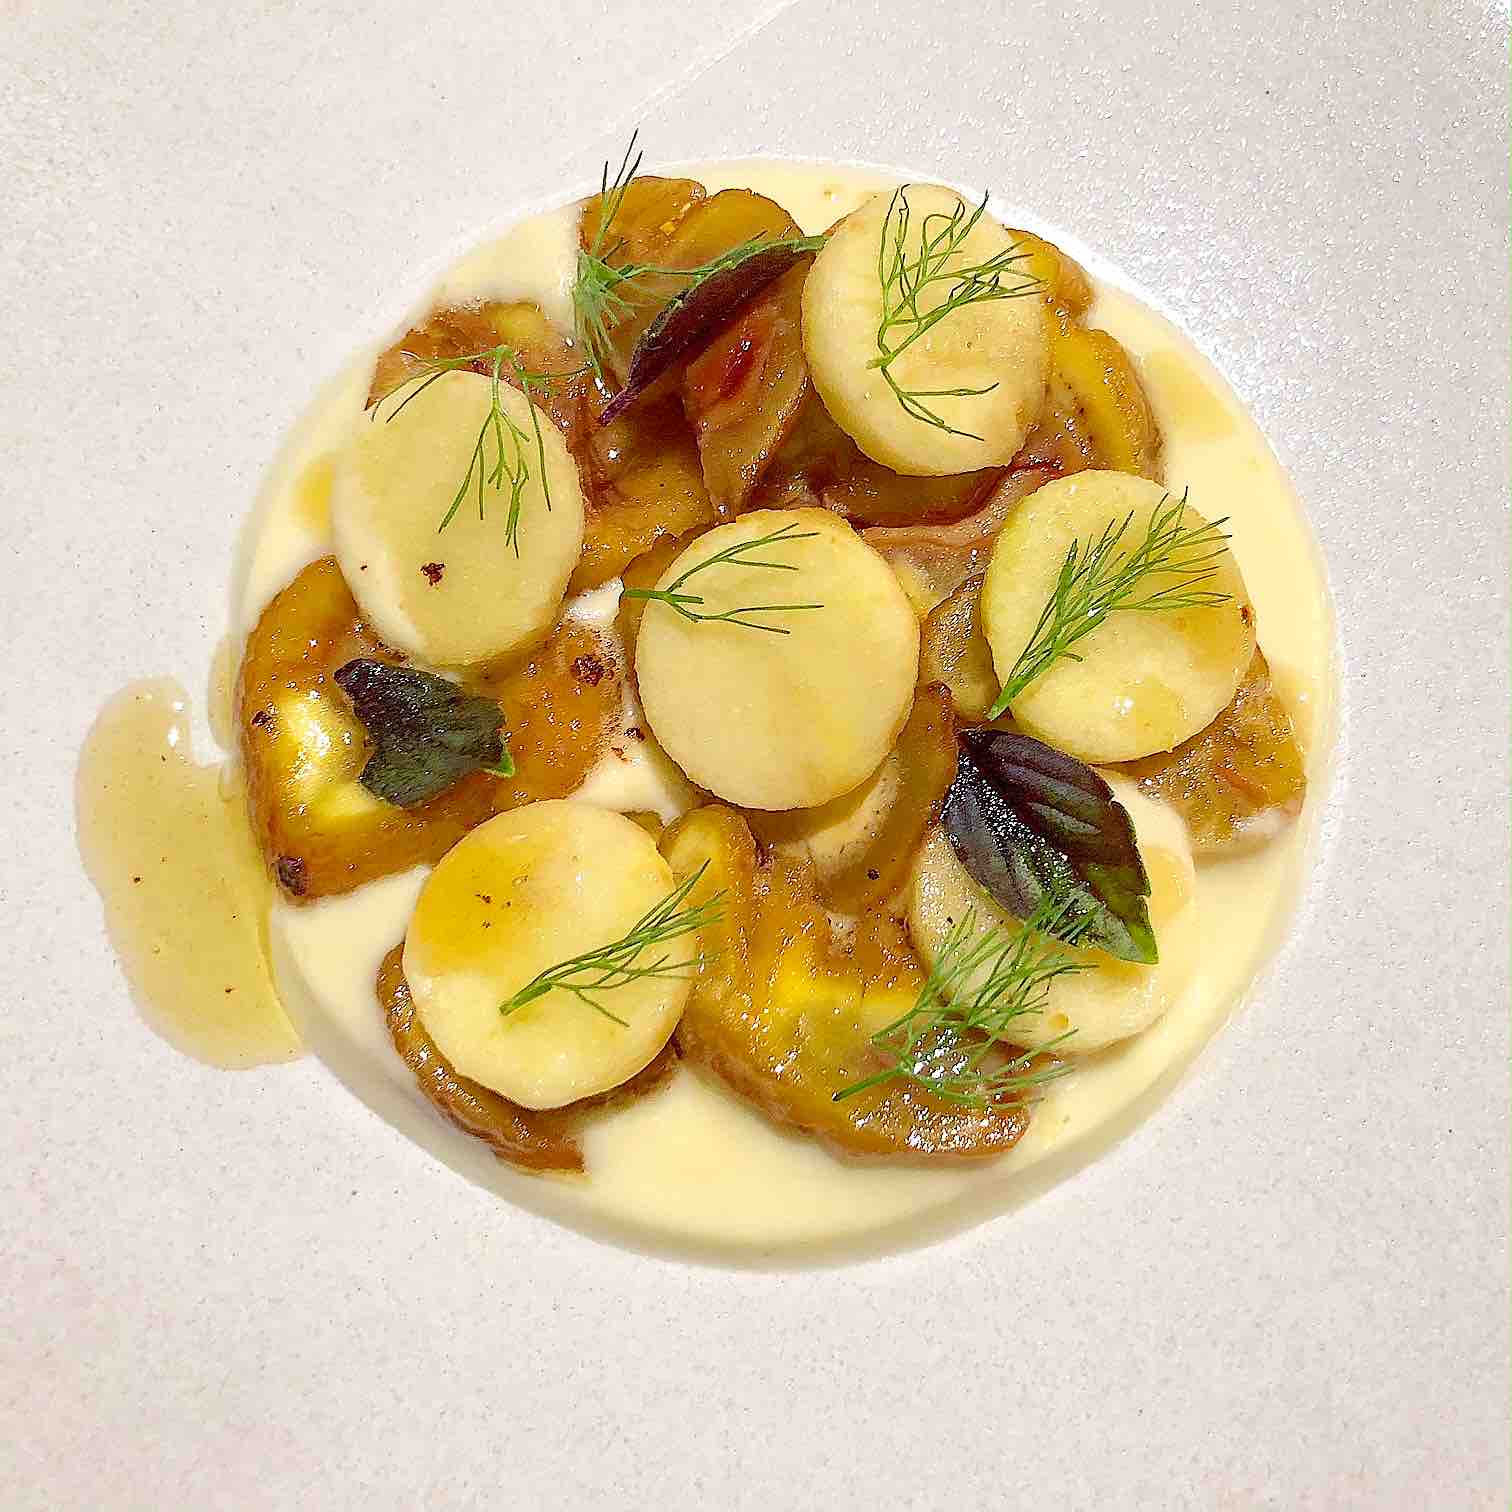 Chestnut, apple and Fennel